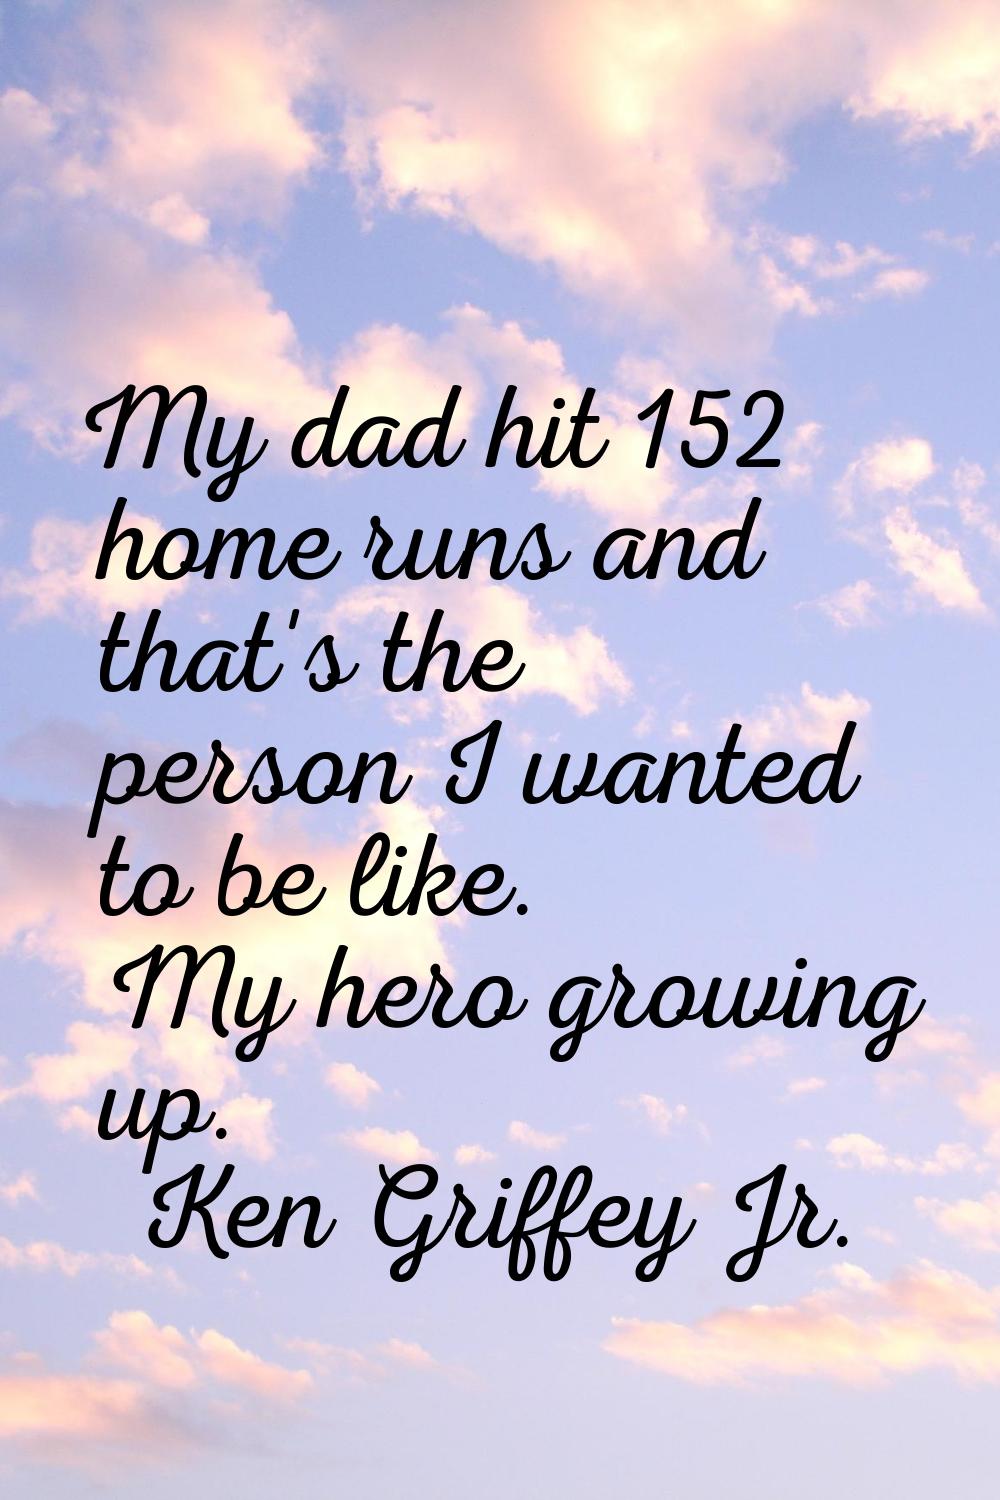 My dad hit 152 home runs and that's the person I wanted to be like. My hero growing up.